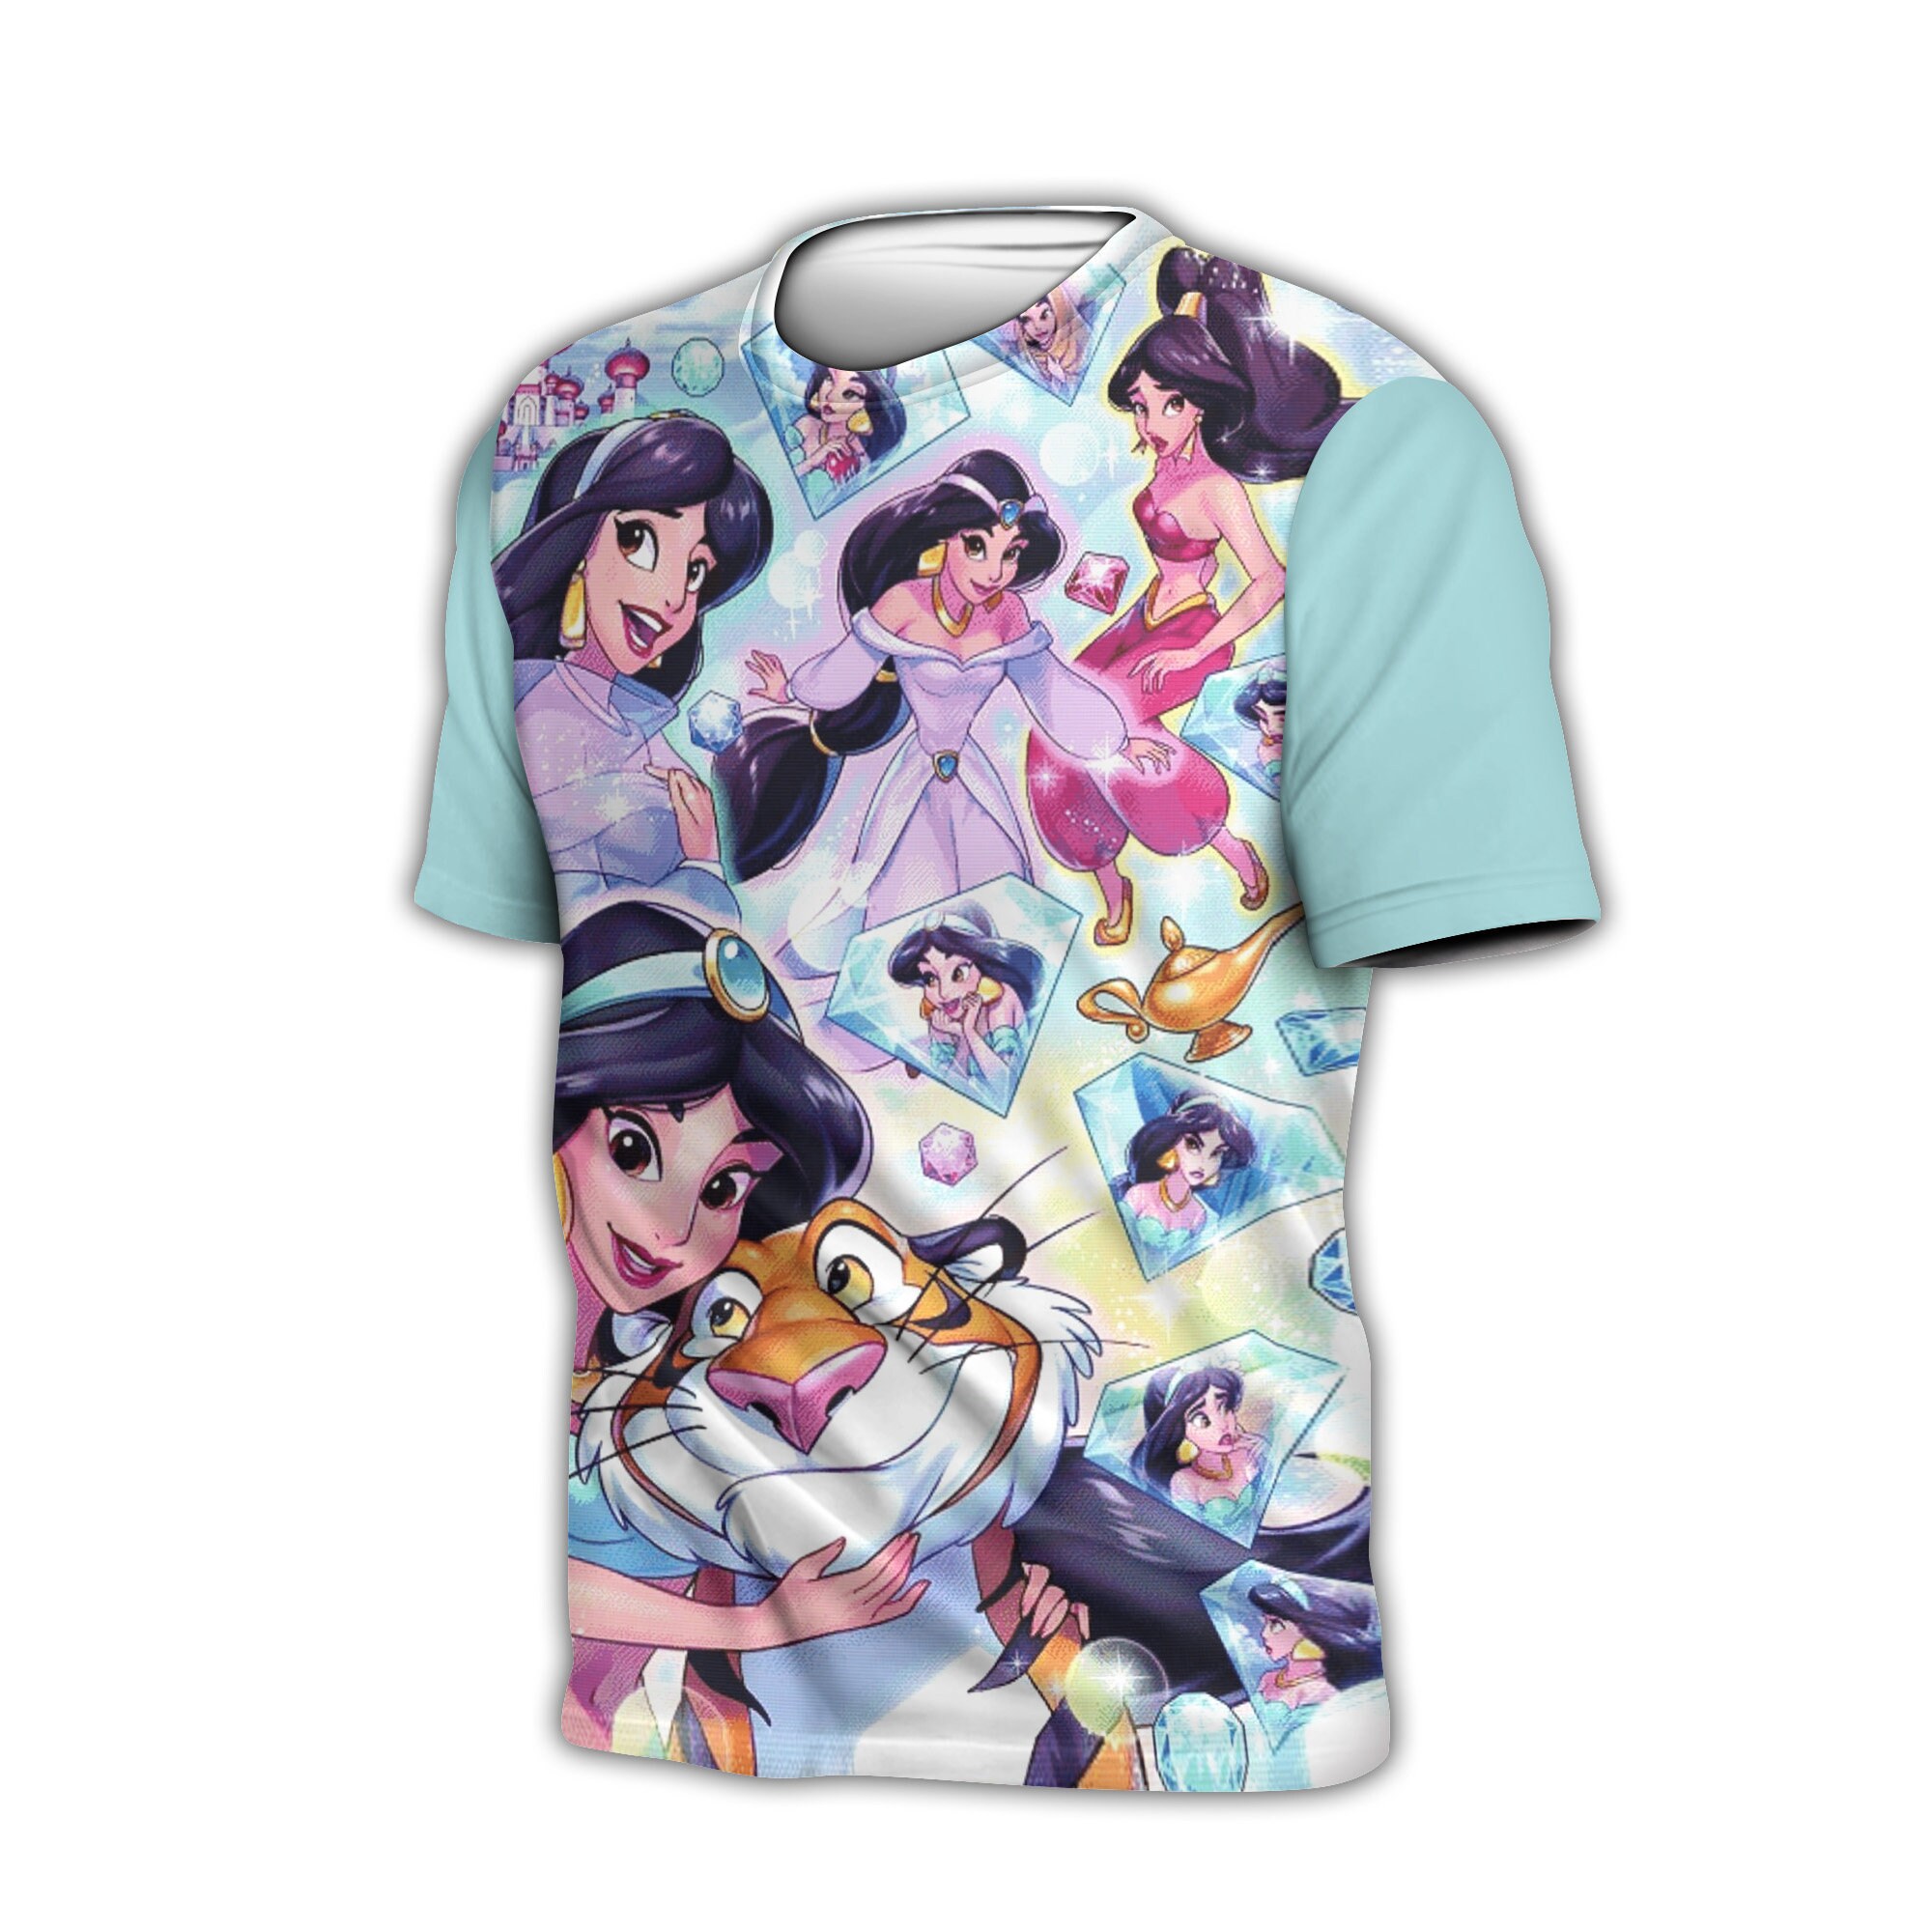 Jasmine & Rajah Clear Button Overalls Patterns Disney Outfits Unisex Casual T-shirts 3D